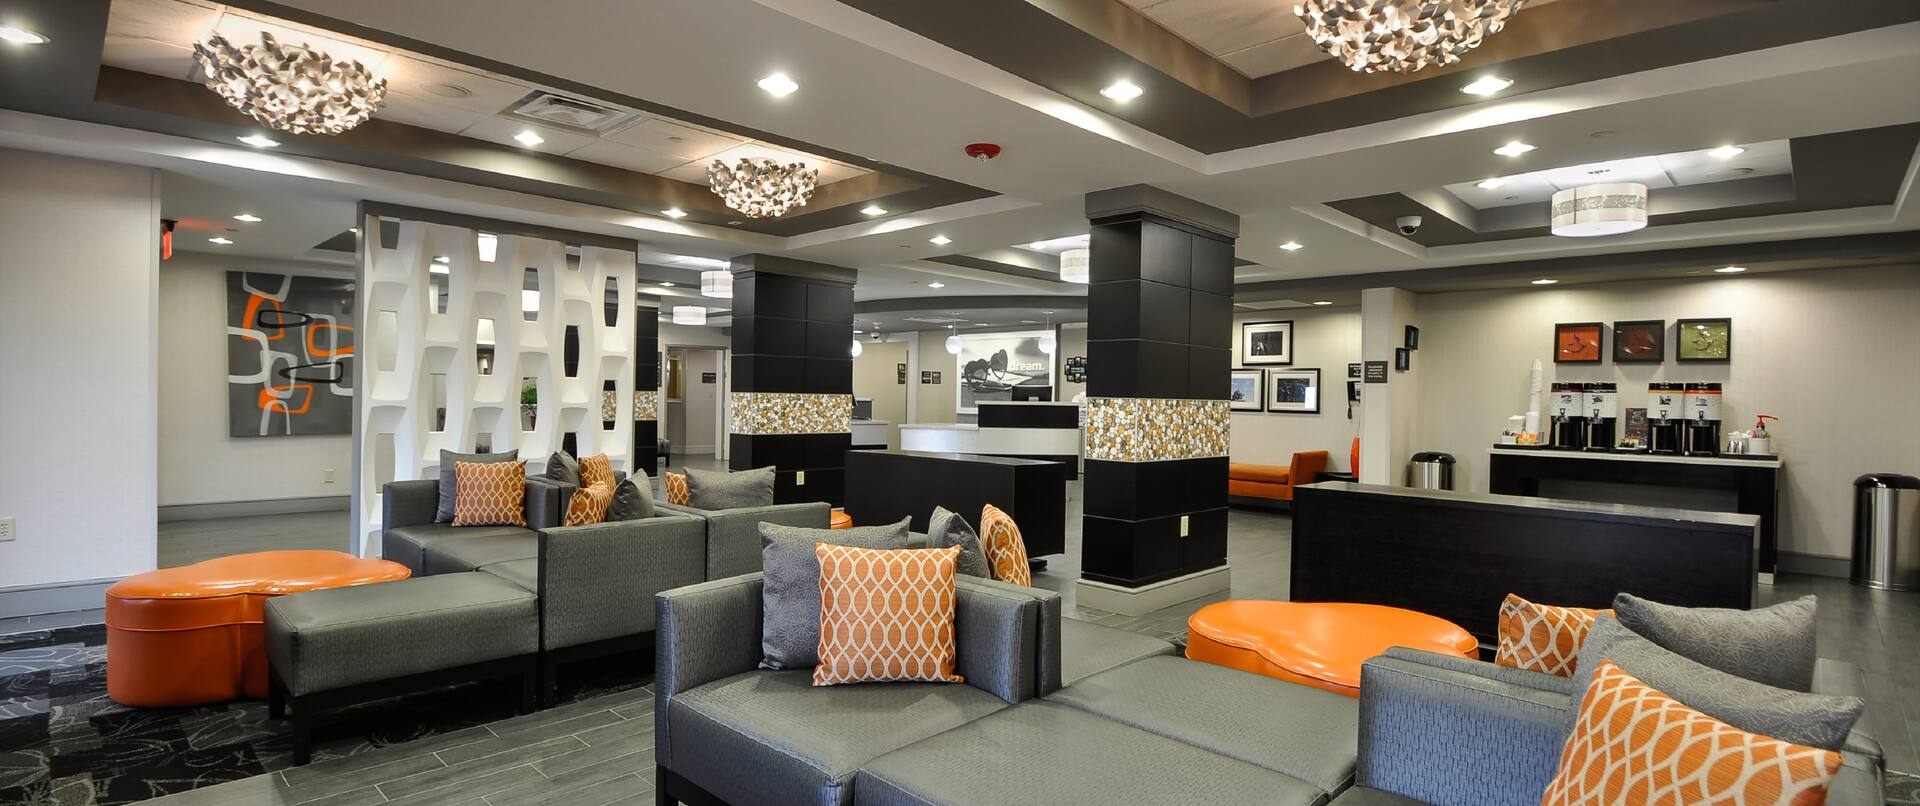 Hotel Lobby Seating Area with Sofa Seating and Coffee Station